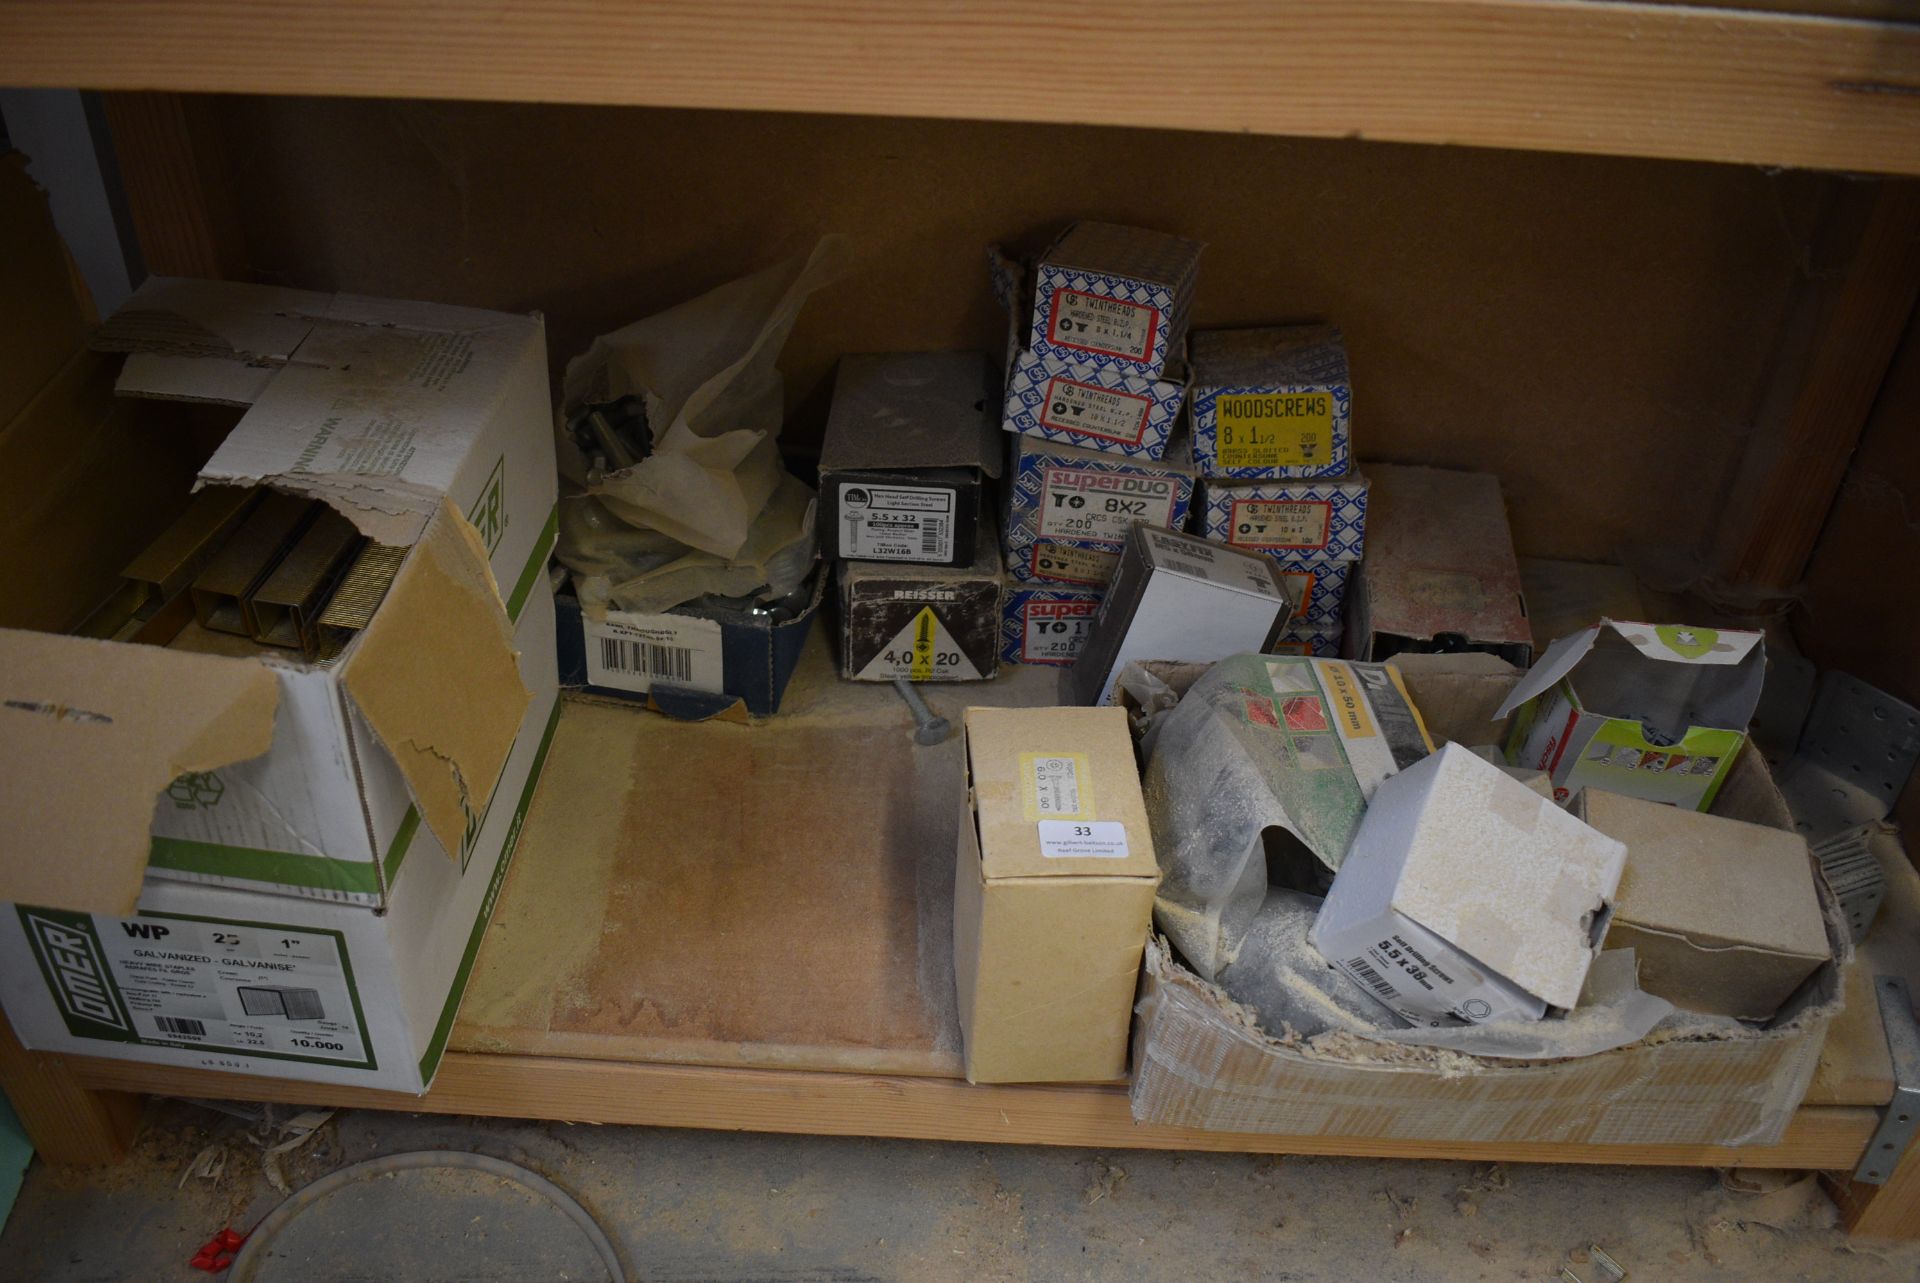 *Contents of Bottom Shelf to Include Various Staples, Nuts, Bolts, CSK Wood Screws, Galvanised